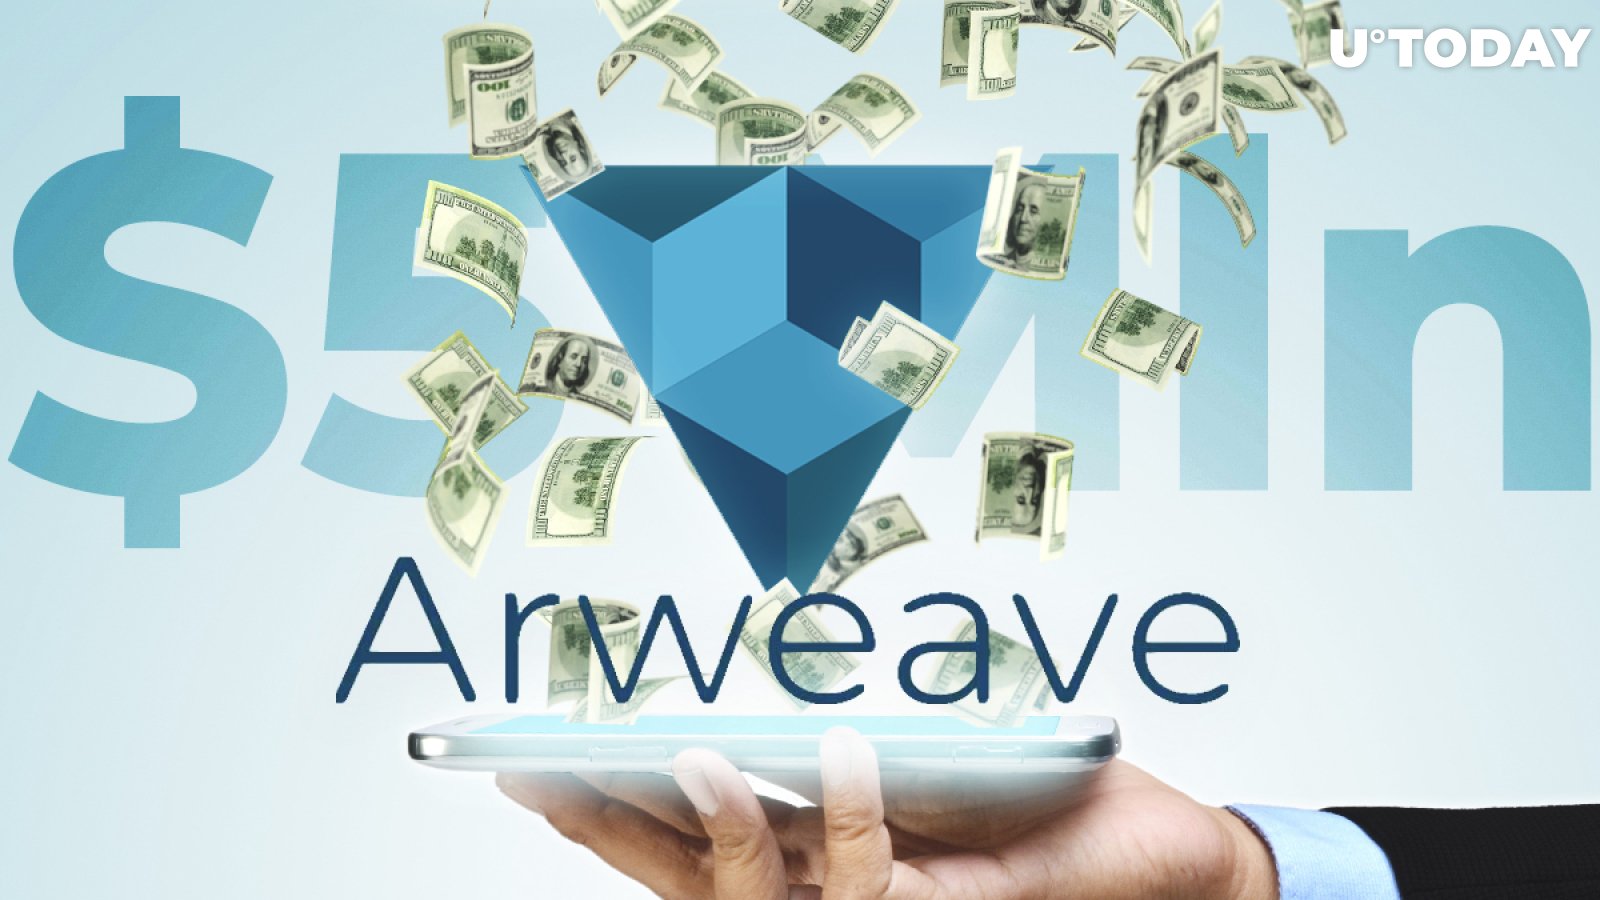 Blockchain Startup Arweave Rakes In $5 Mln During a16z-led Funding Round  